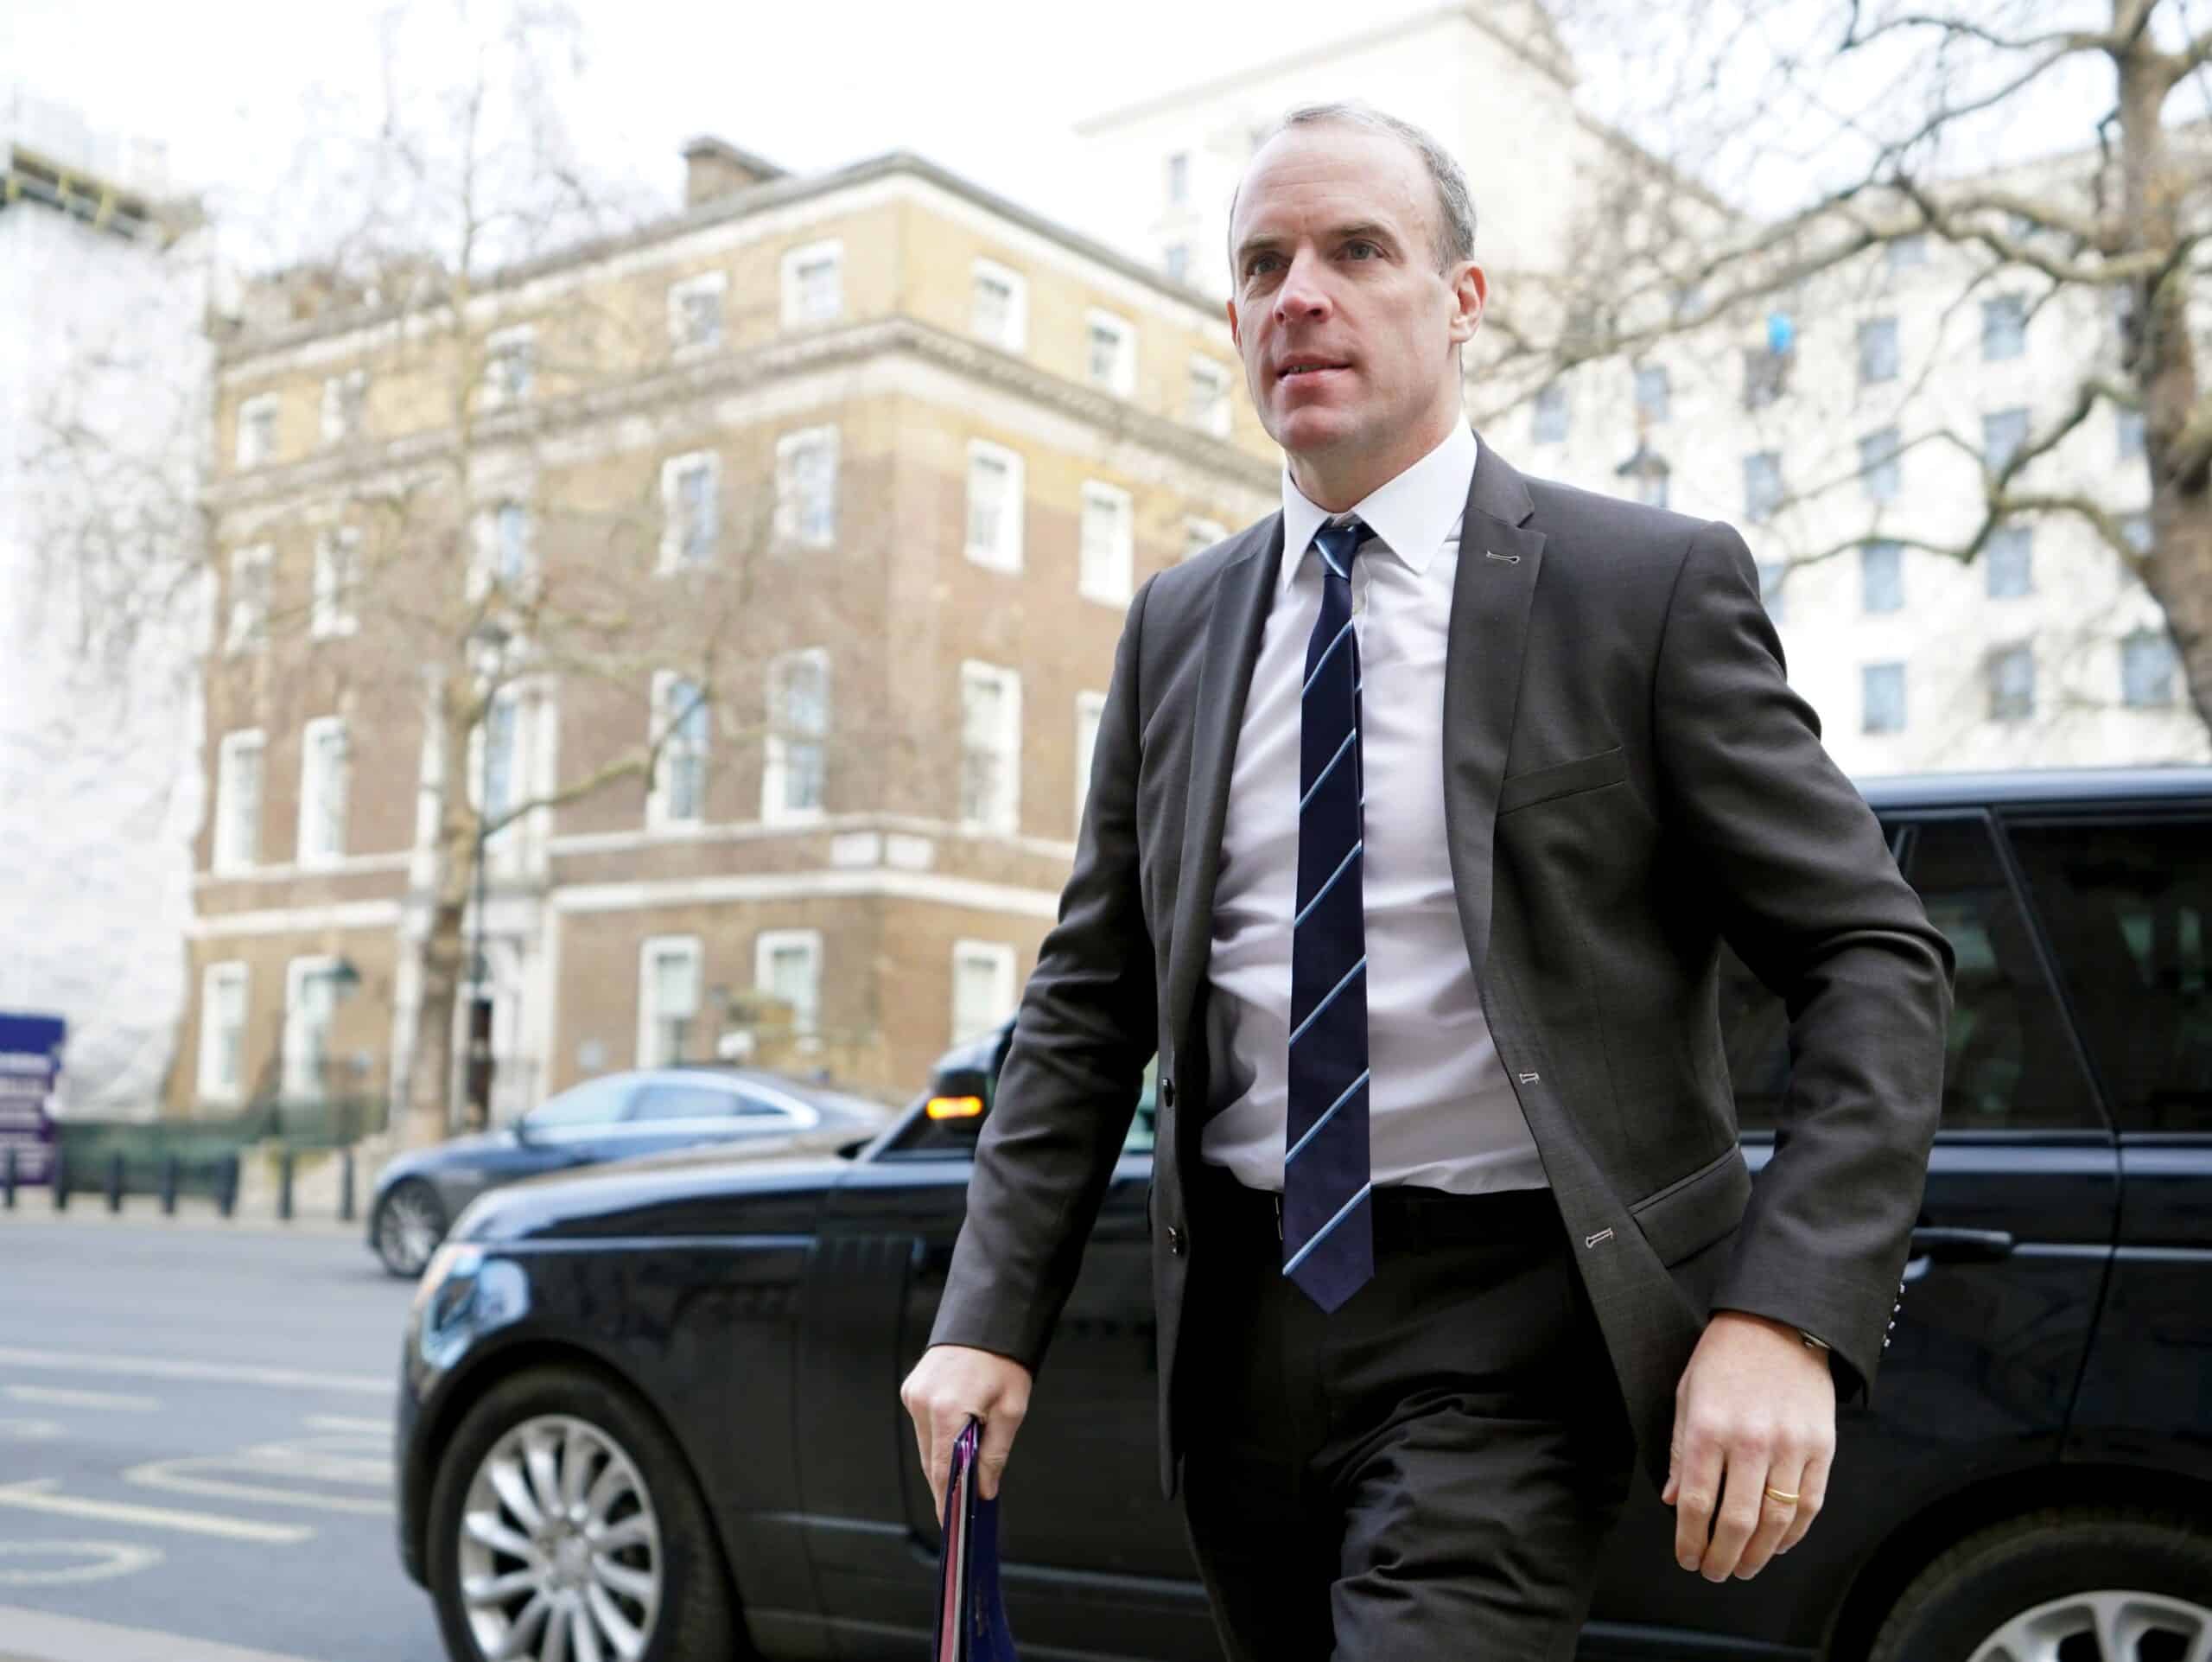 Cabinet minister joins calls for Raab to go, saying he’s ‘just not a nice person’